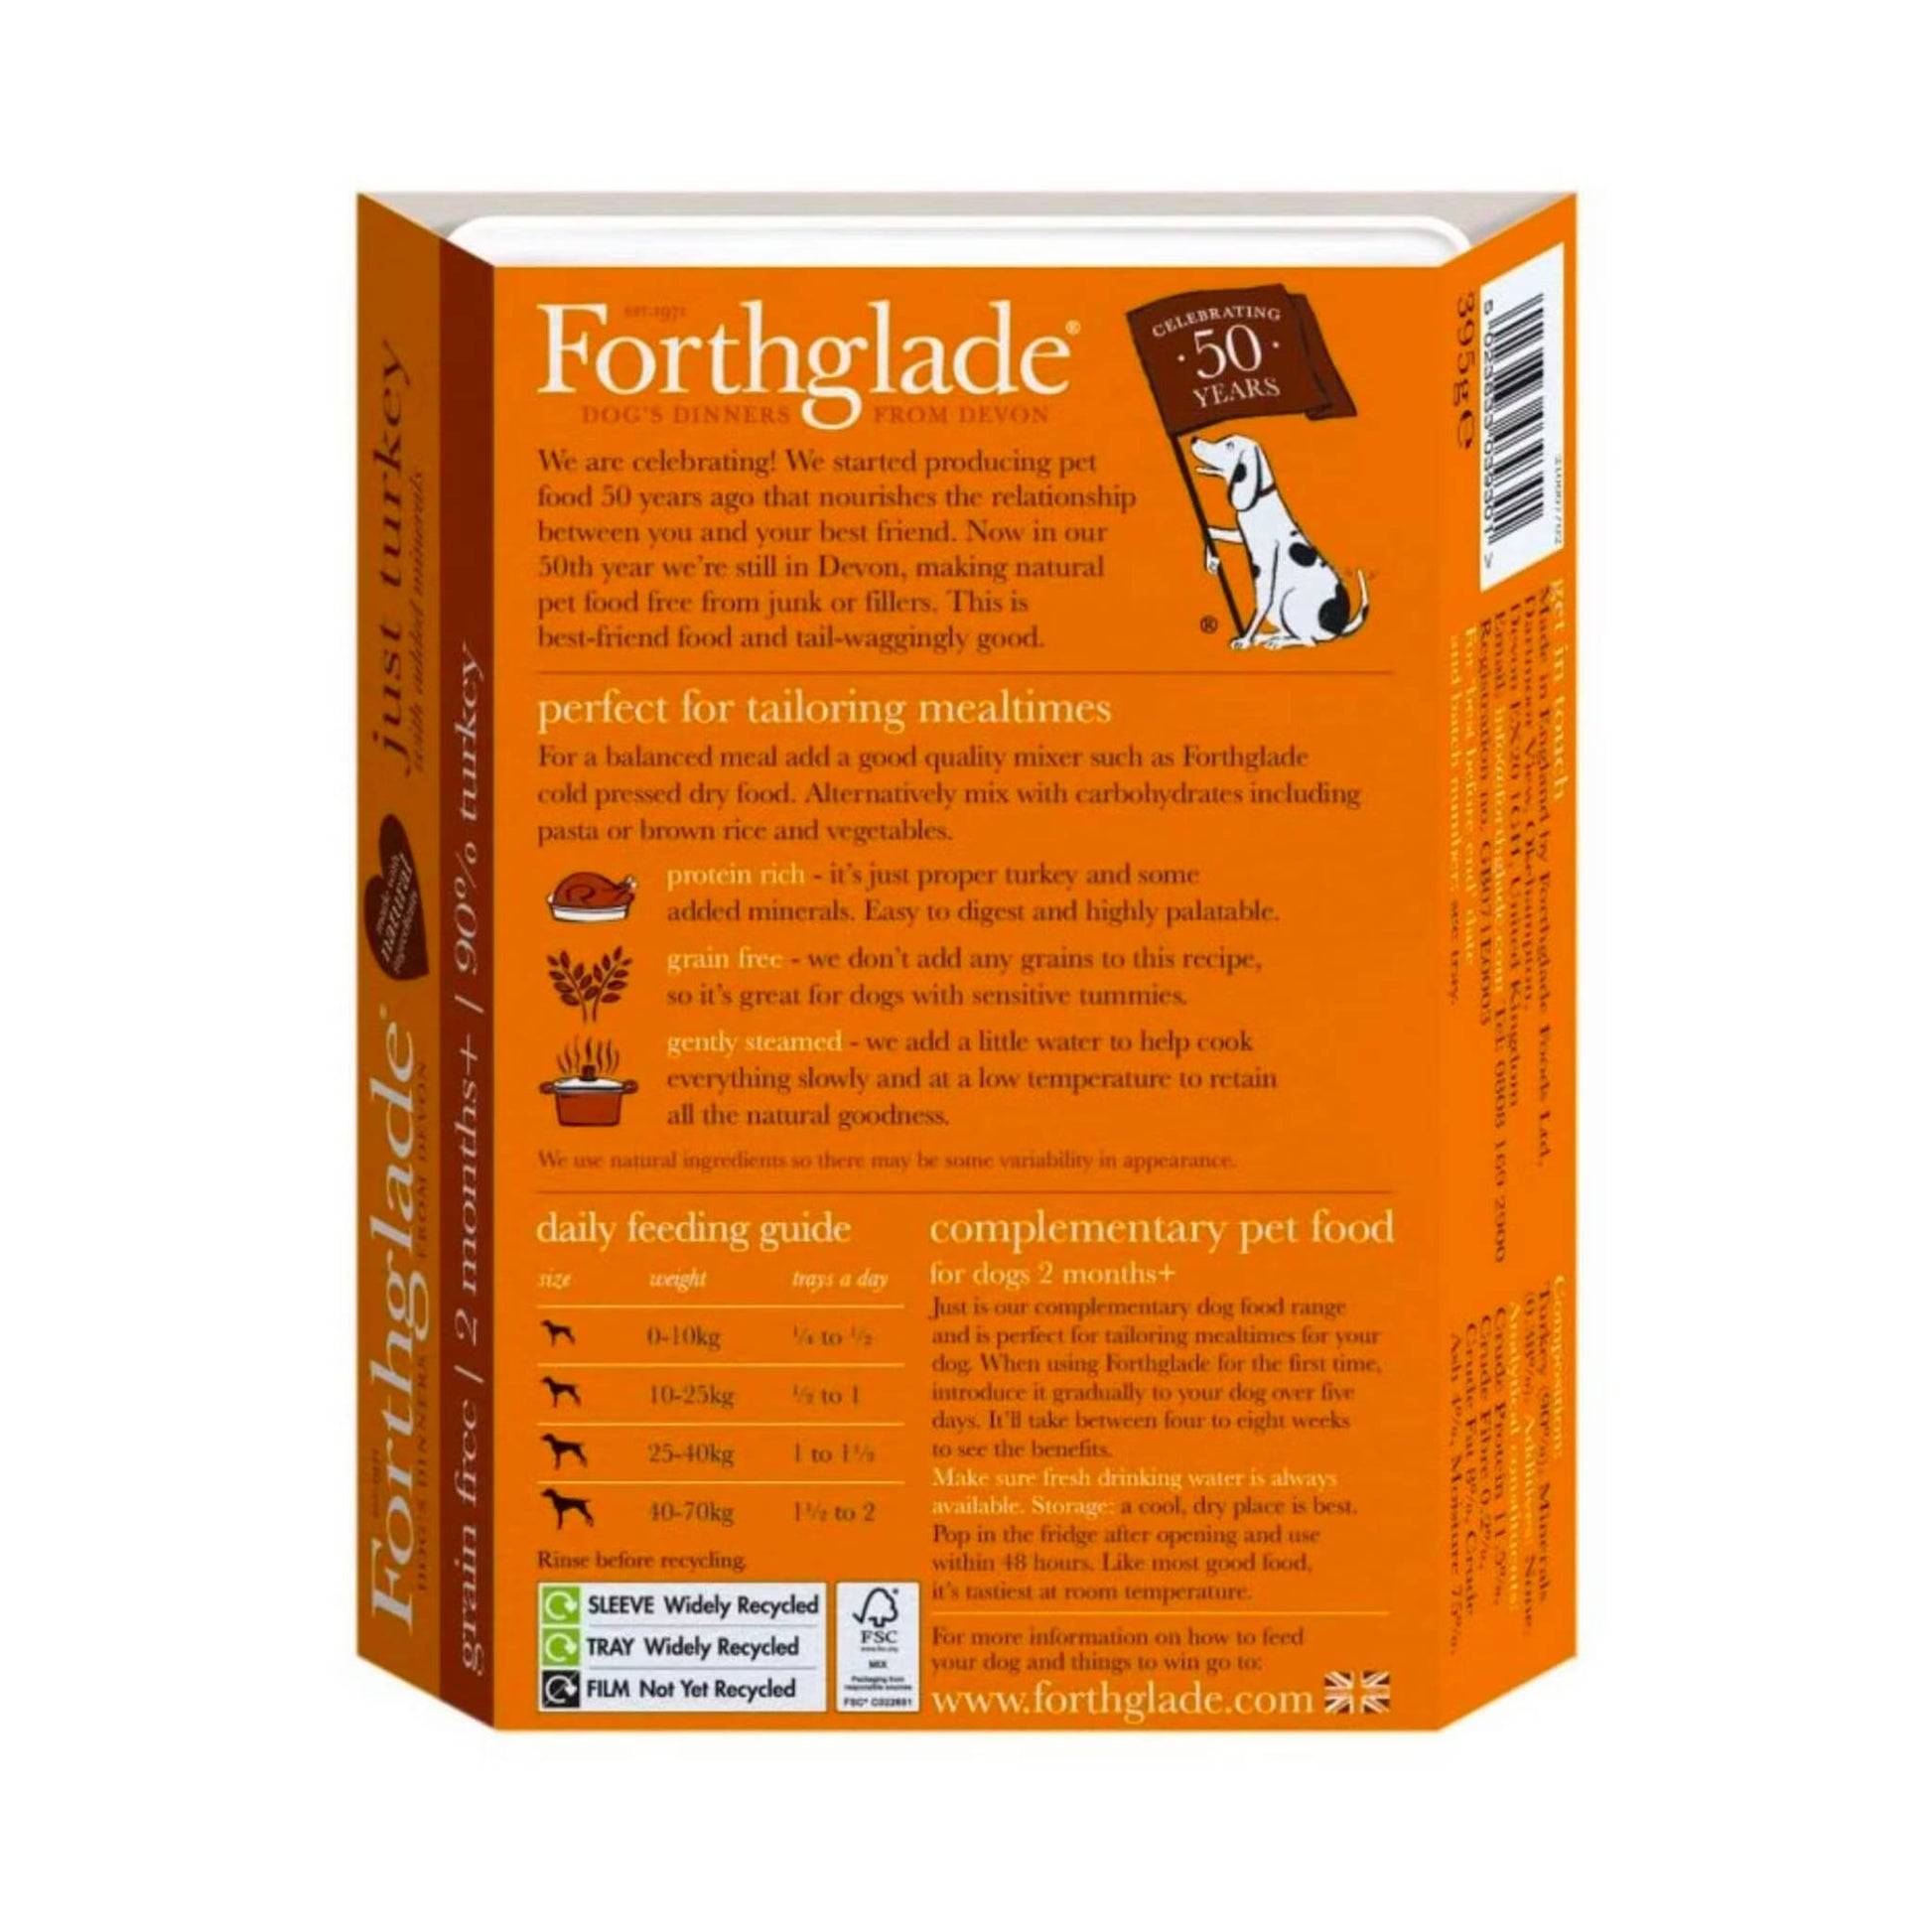 Forthglade Just Turkey feeding guide and ingredients. 